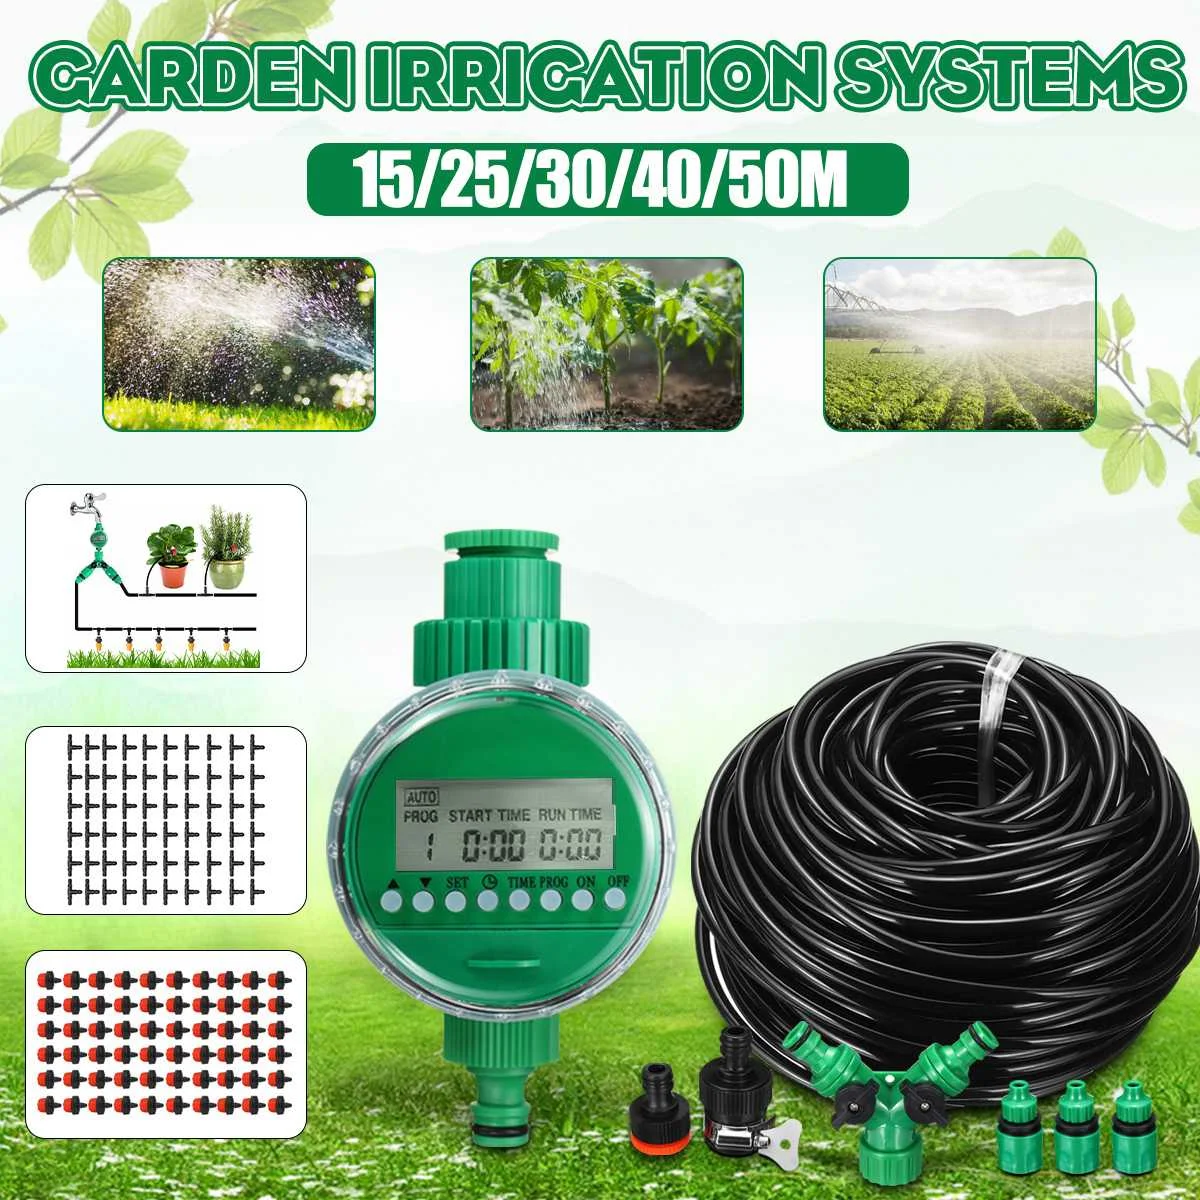 

15/25/30/40/50m Automatic Watering Timer Irrigation System Greenhouse Plant Kit for Garden Flower Plants Bonsai Intelligent Care